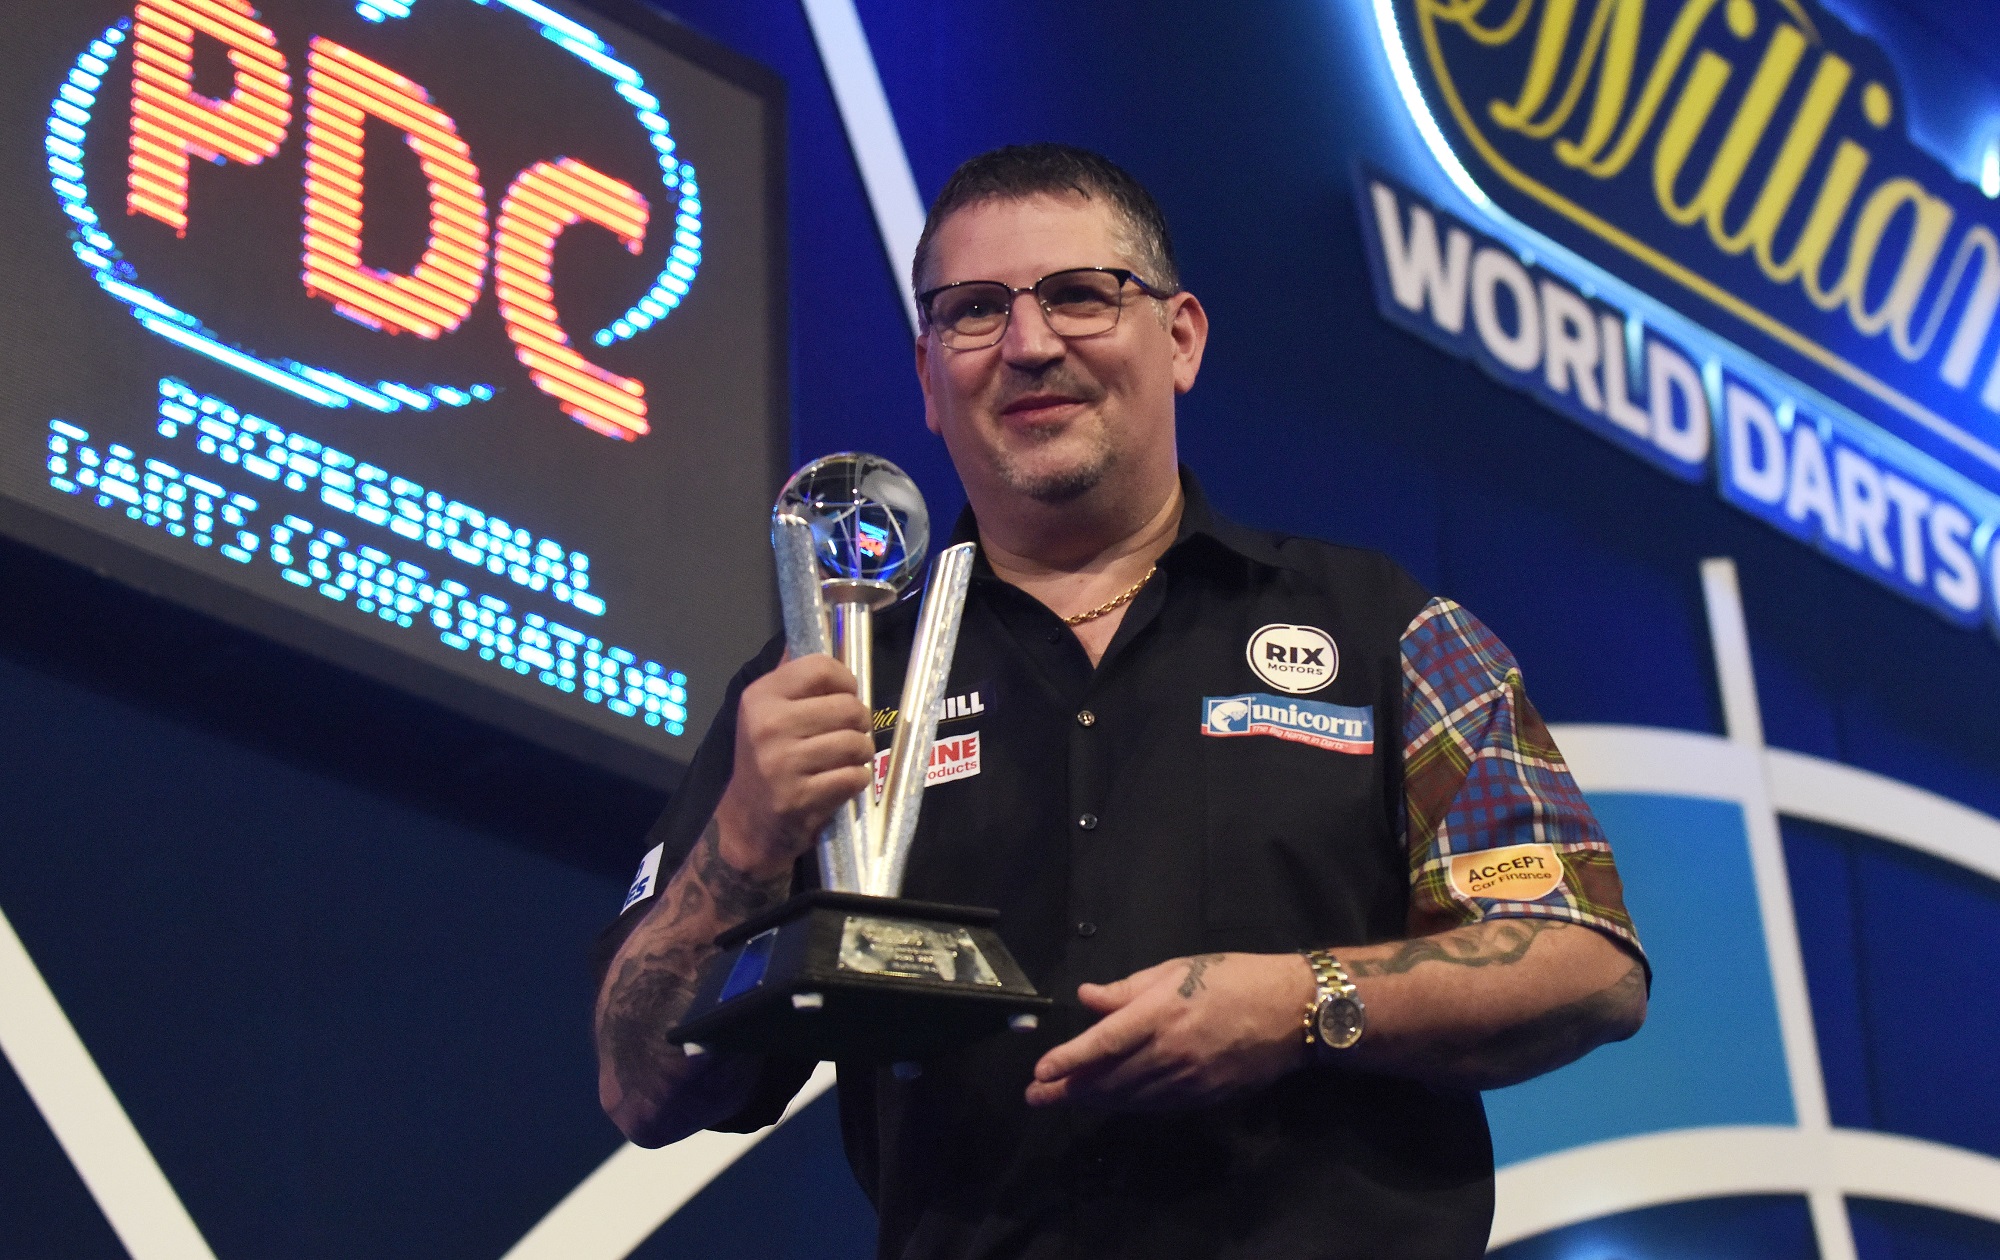 Anderson denied third World title at Ally Pally